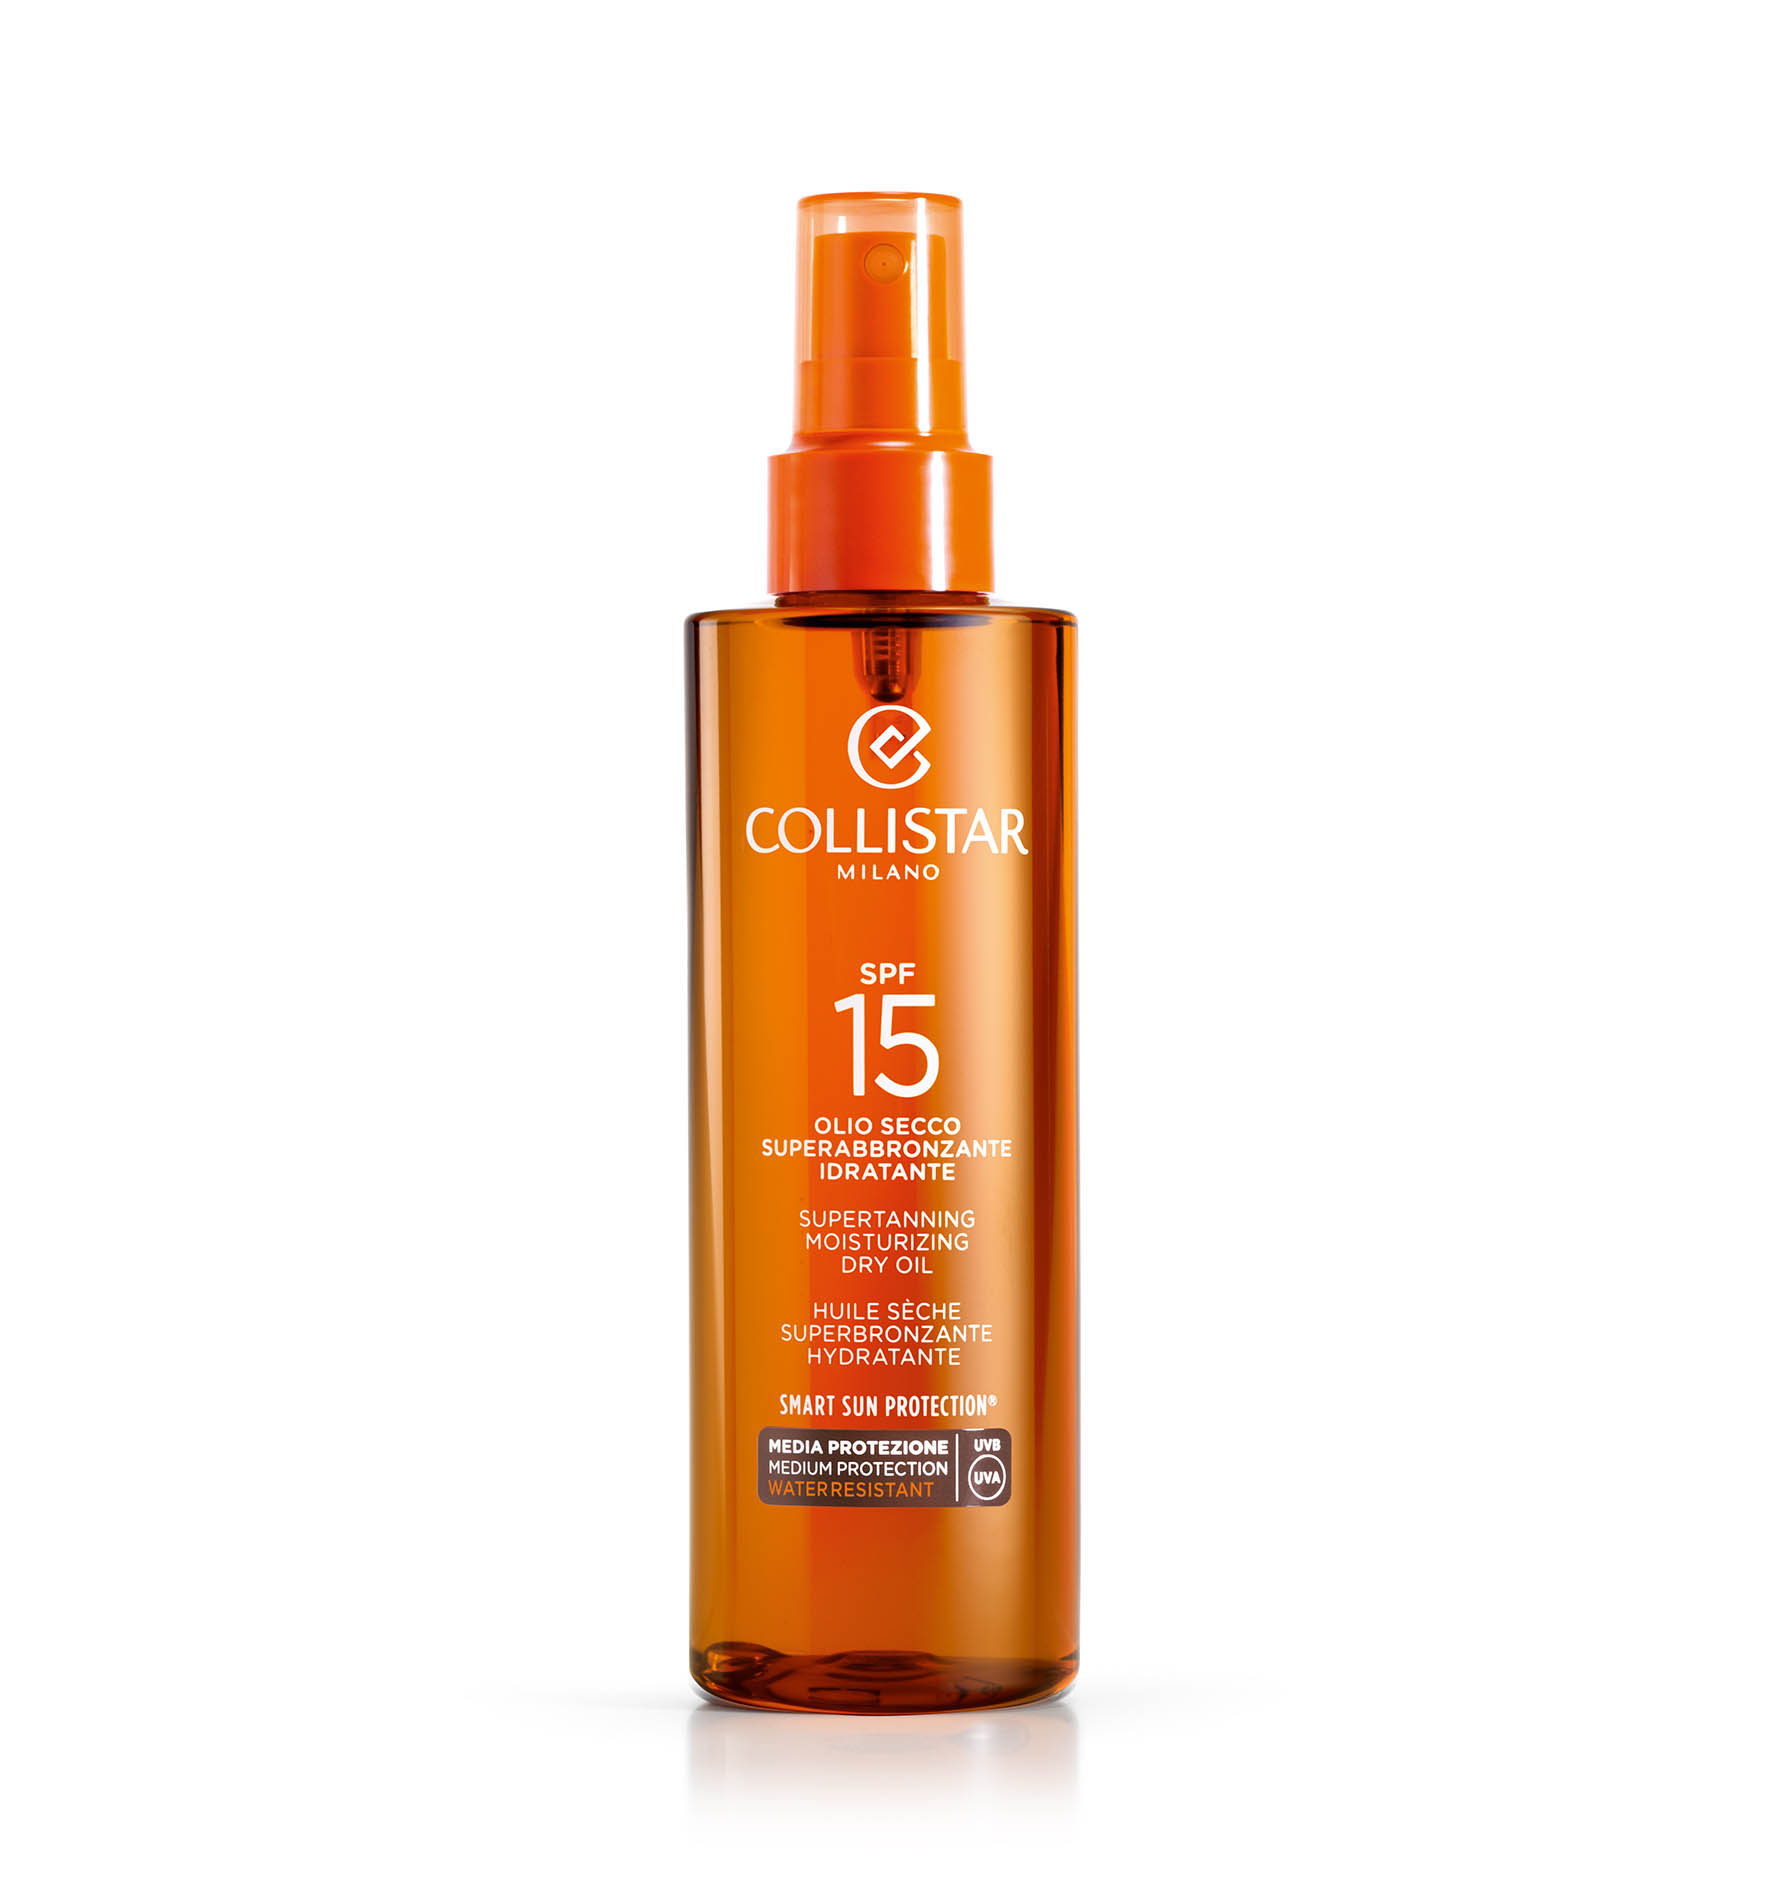 SUPERTANNING MOISTURIZING DRY OIL SPF 15 - Moderate Protection SPF 15-20 | Collistar - Shop Online Ufficiale